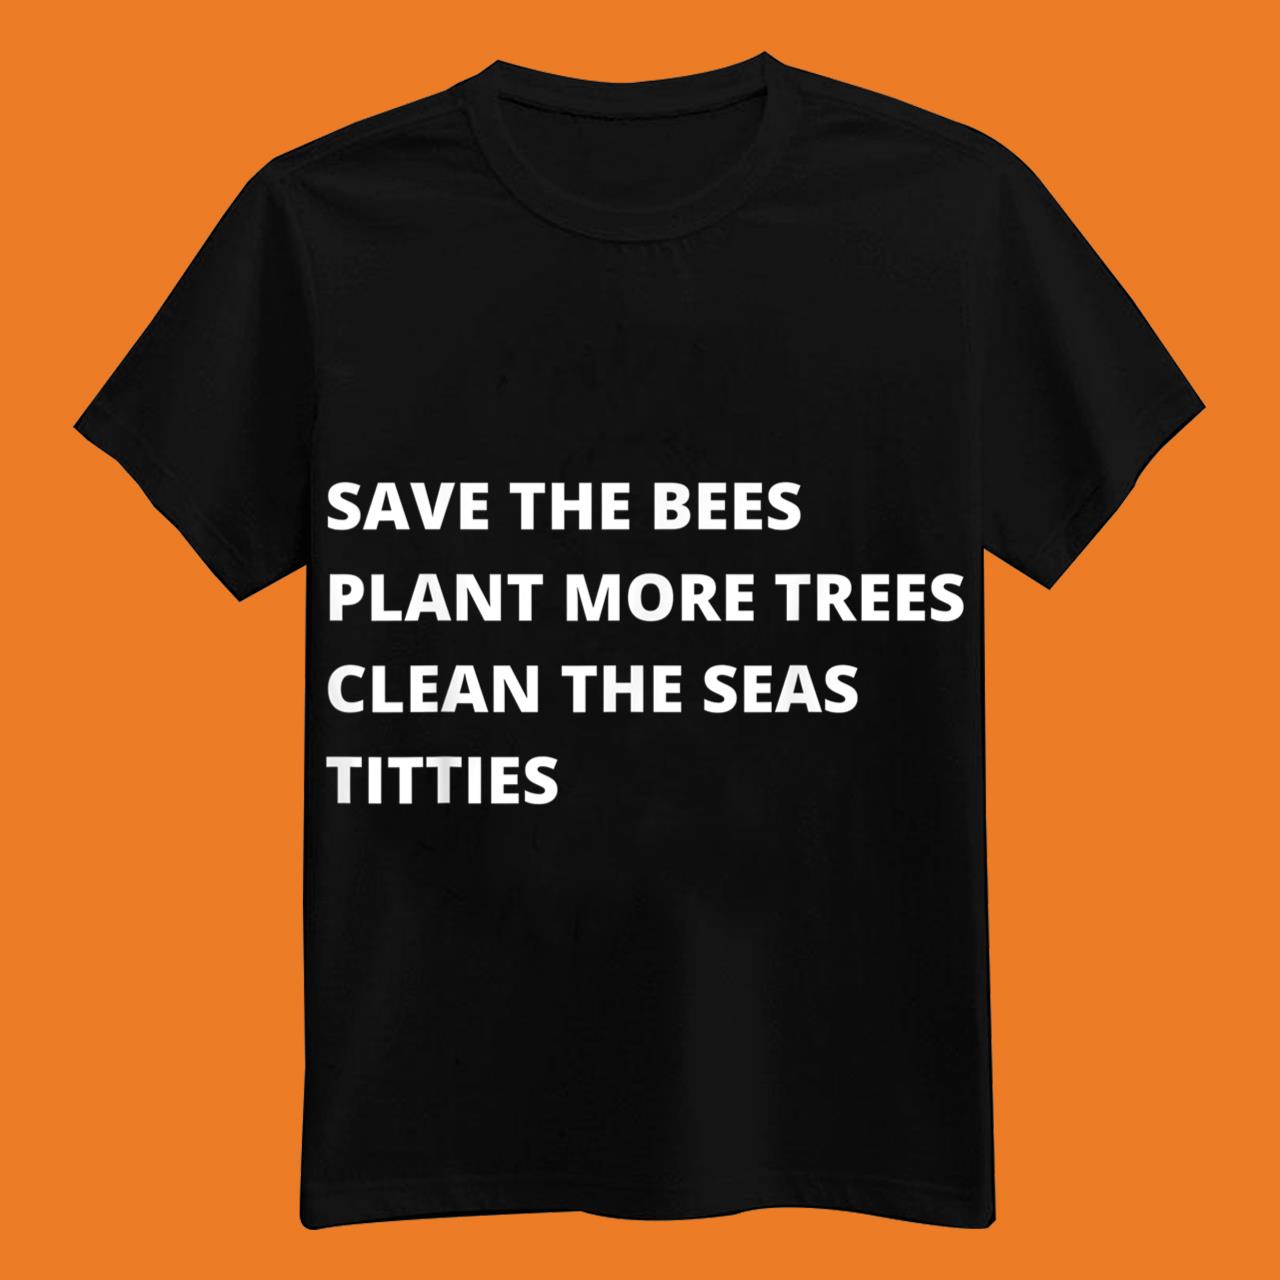 Save The Bees Plant More Trees Clean The Seas Titties Tee Shirt